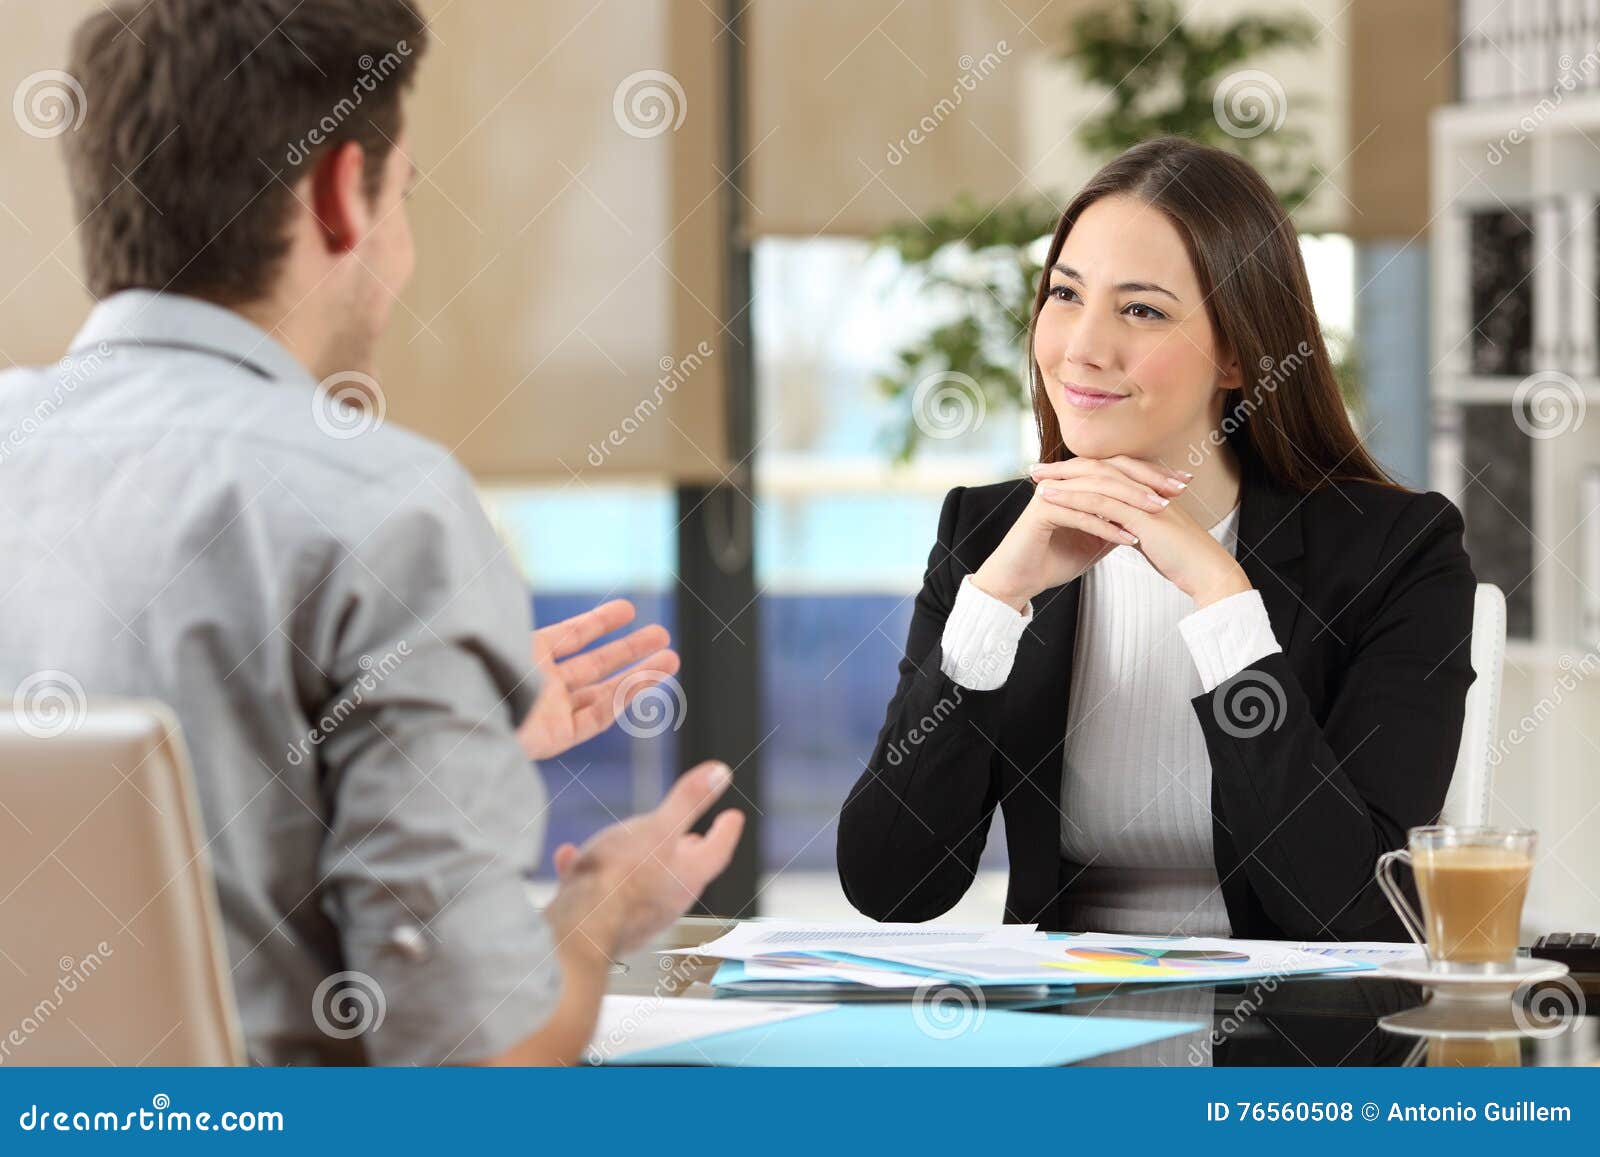 businesswoman attending a client at office